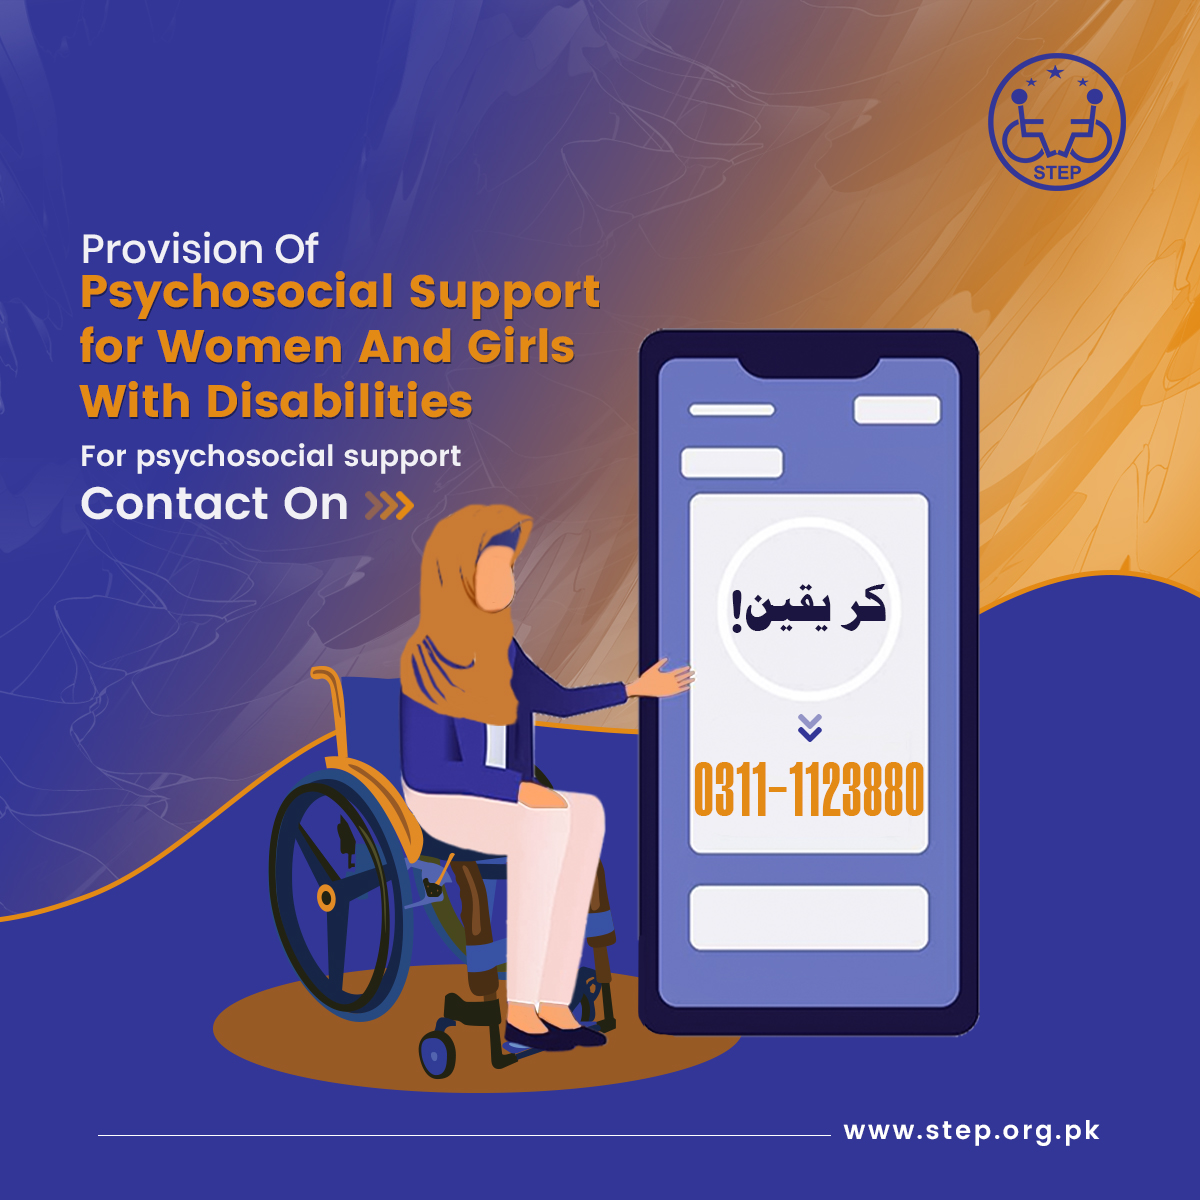 Provision of Psychosocial Support for Gender-Based Violence survivors specifically Women and Girls with disabilities.

#STEP #STEPPakistan #UNFPA #UKAID #Disabilityrights #Womenwithdisabilities #Endgenderbasedviolence #GBV #StopGBVagainstWWD #LeavingNoOneBehind